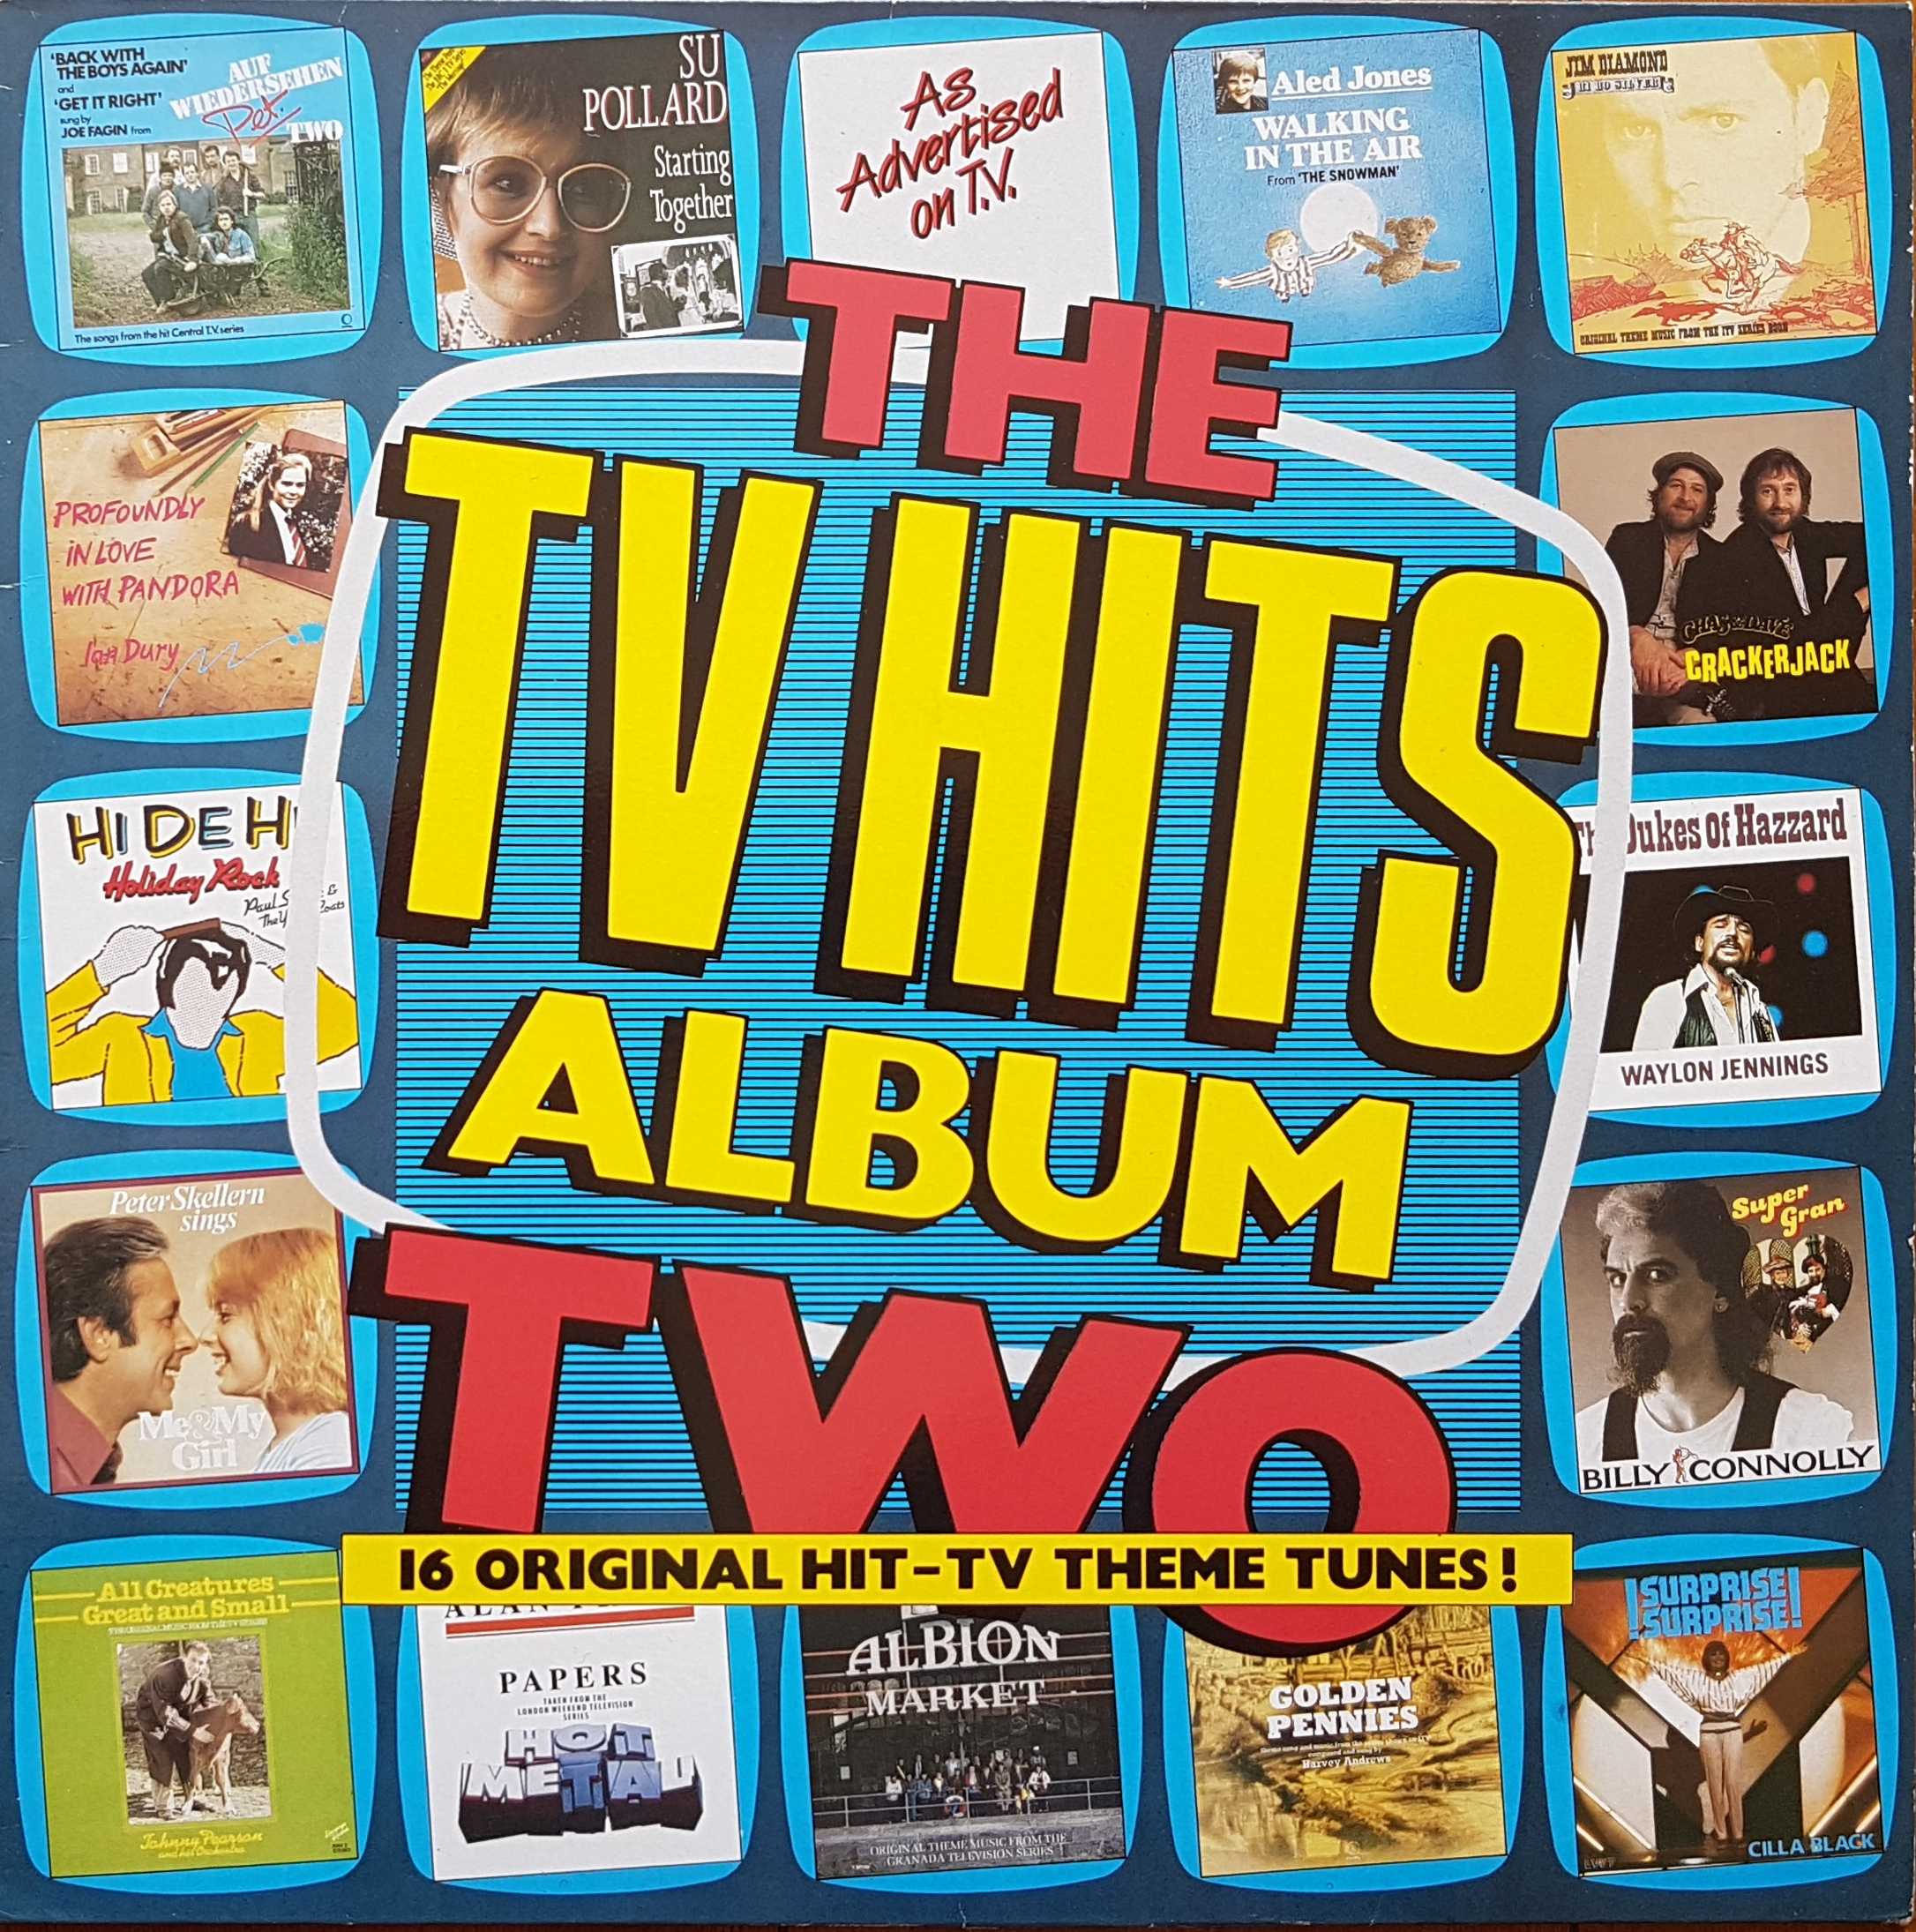 Picture of The TV hits album - Volume 2 by artist Various from ITV, Channel 4 and Channel 5 albums library